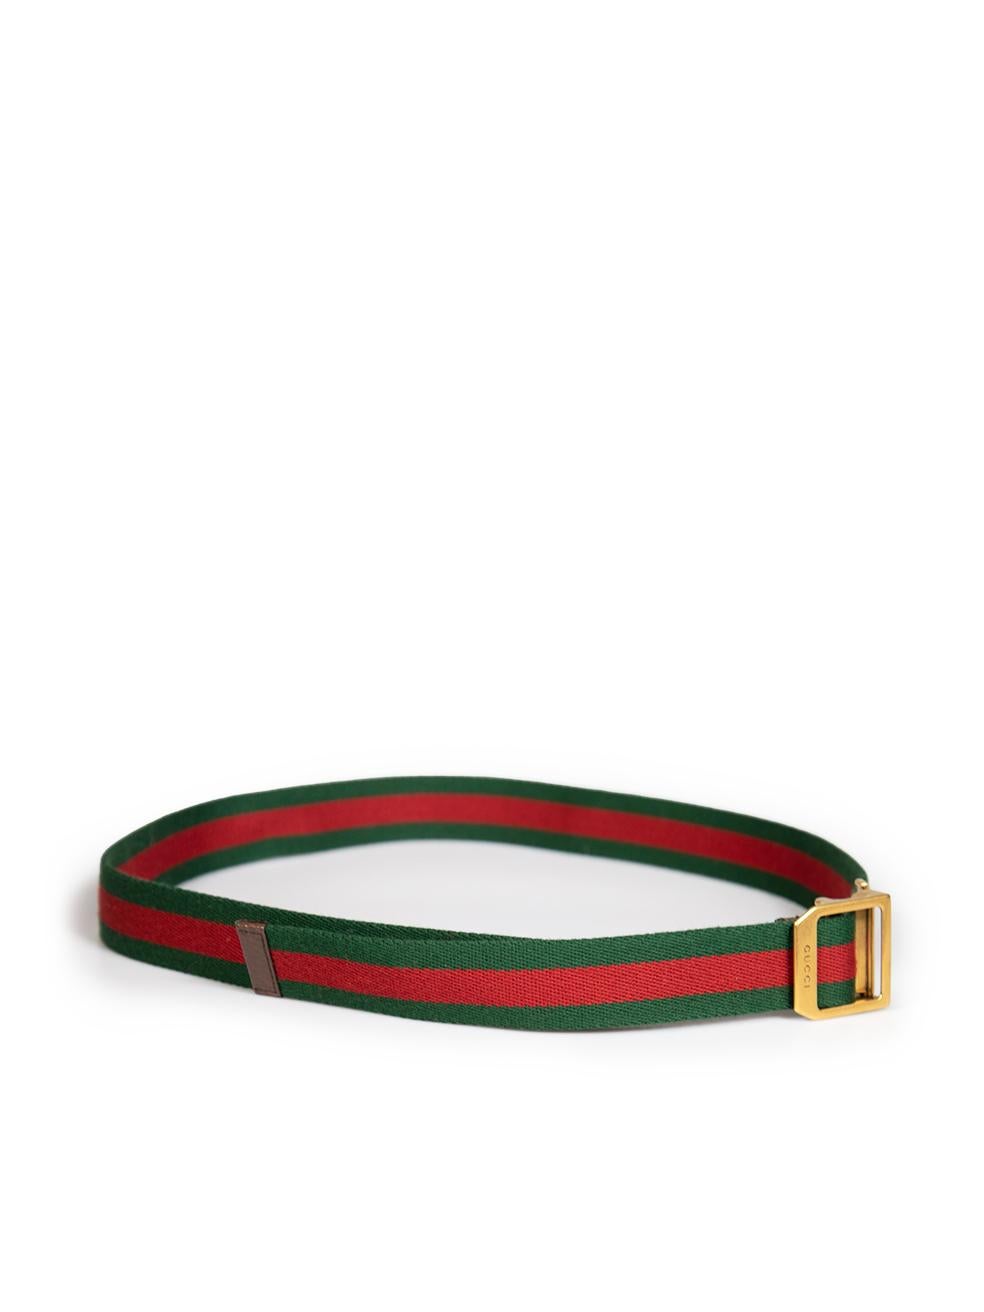 CONDITION is Very good. Minimal wear to belt is evident. Minimal scratches to hardware on this used Gucci designer resale item. This item comes with original dust bag.
 
 
 
 Details
 
 
 Multicolour - Green and red
 
 Cloth textile
 
 Waist belt
 
